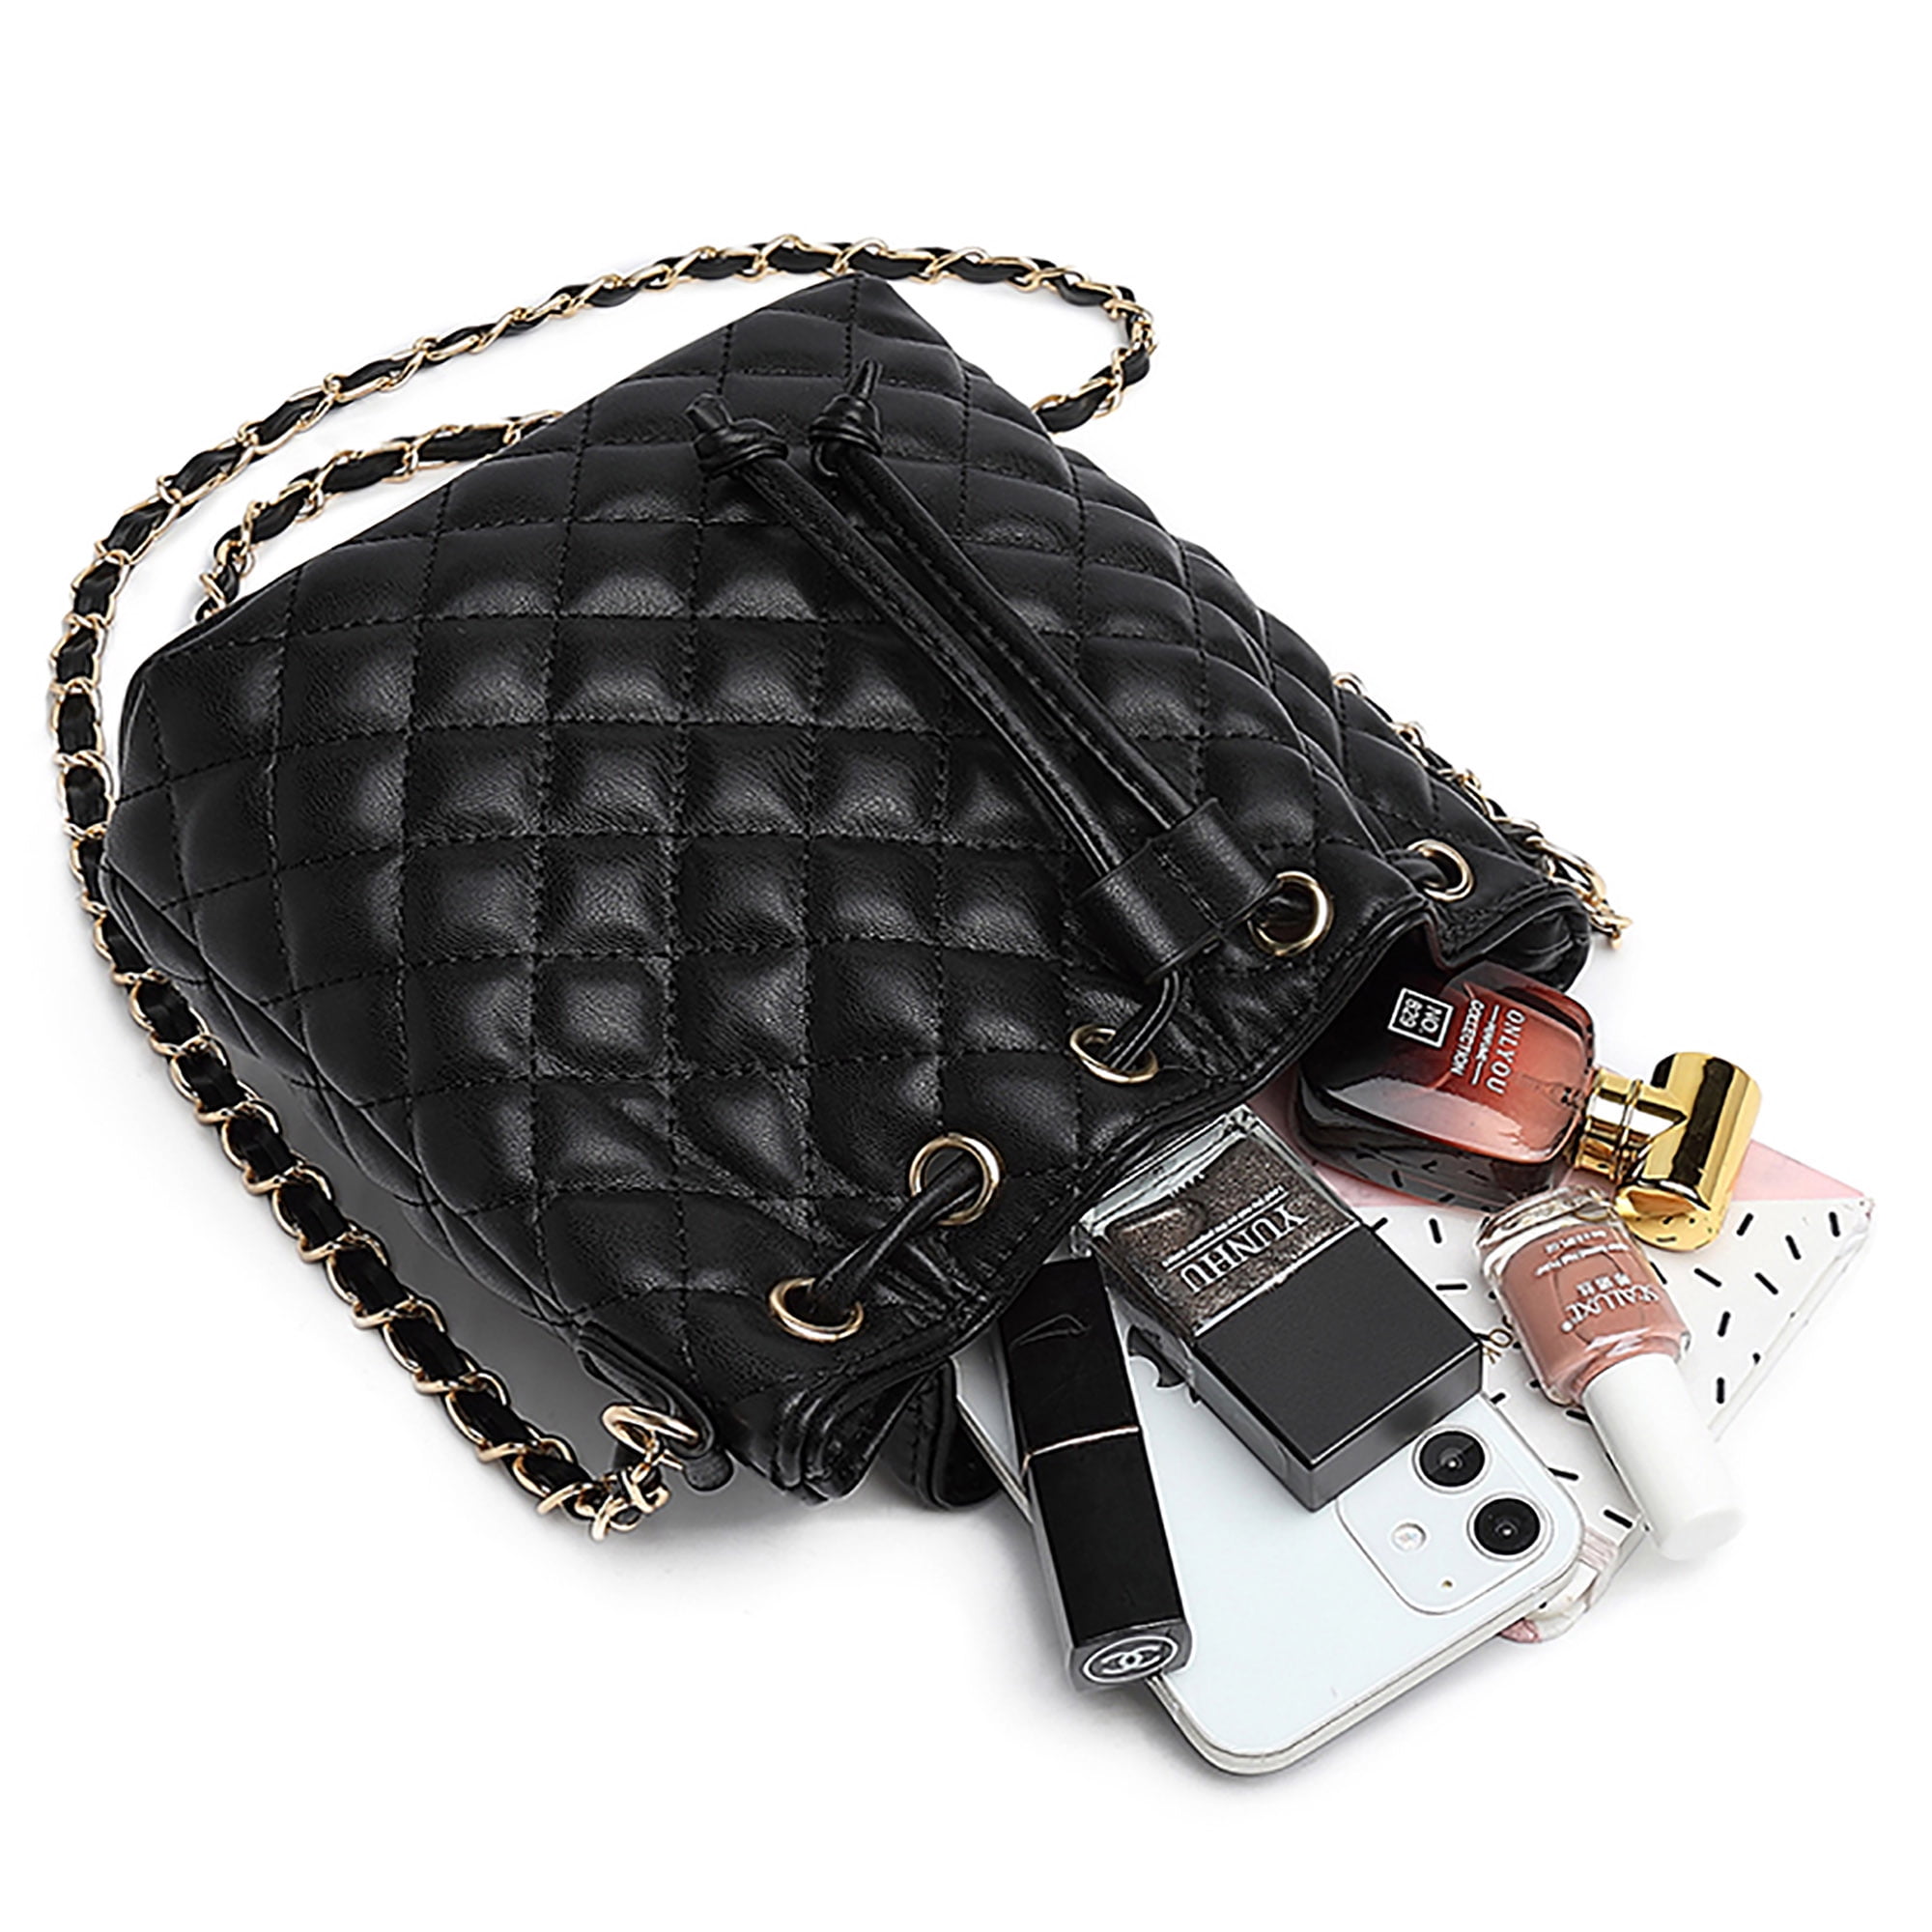 Quilted Chain Cross-Body Bag Black | Cross-body bags | Accessorize UK